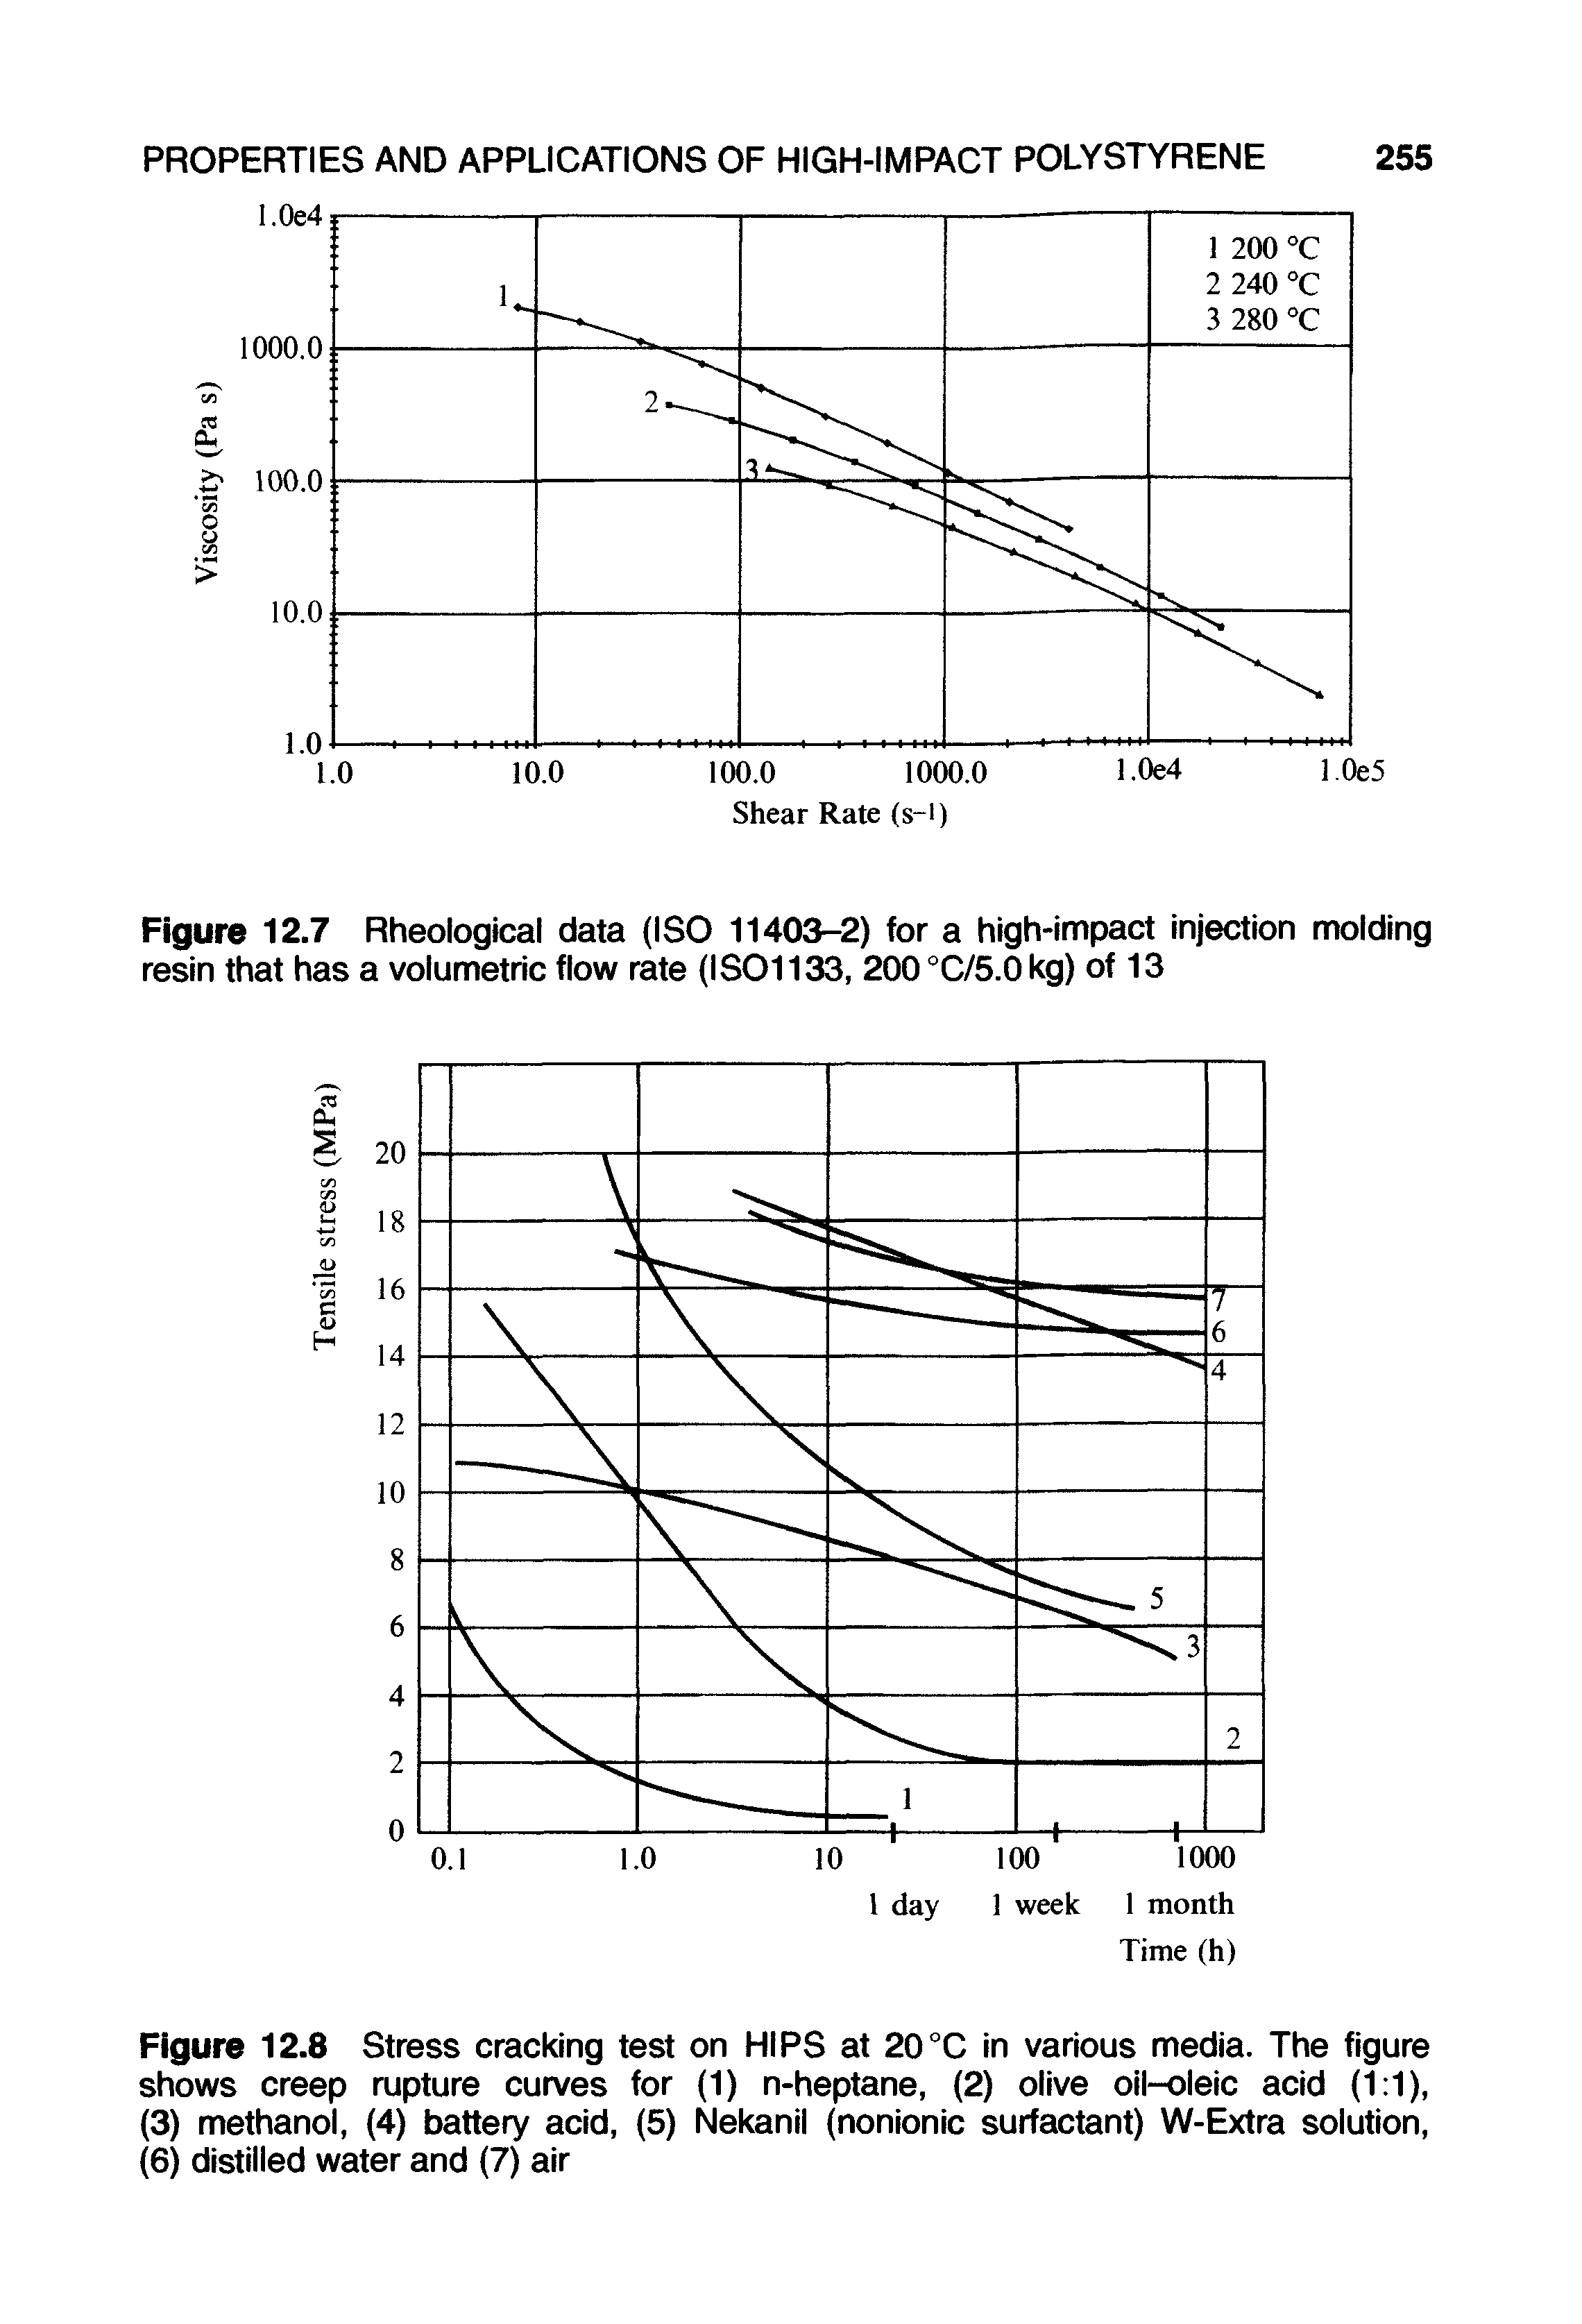 Figure 12.8 Stress cracking test on HIPS at 20°C in various media. The figure shows creep rupture curves for (1) n-heptane, (2) olive oil-oleic acid (1 1), (3) methanol, (4) battery acid, (5) Nekanil (nonionic surfactant) W-Extra solution, (6) distilled water and (7) air...